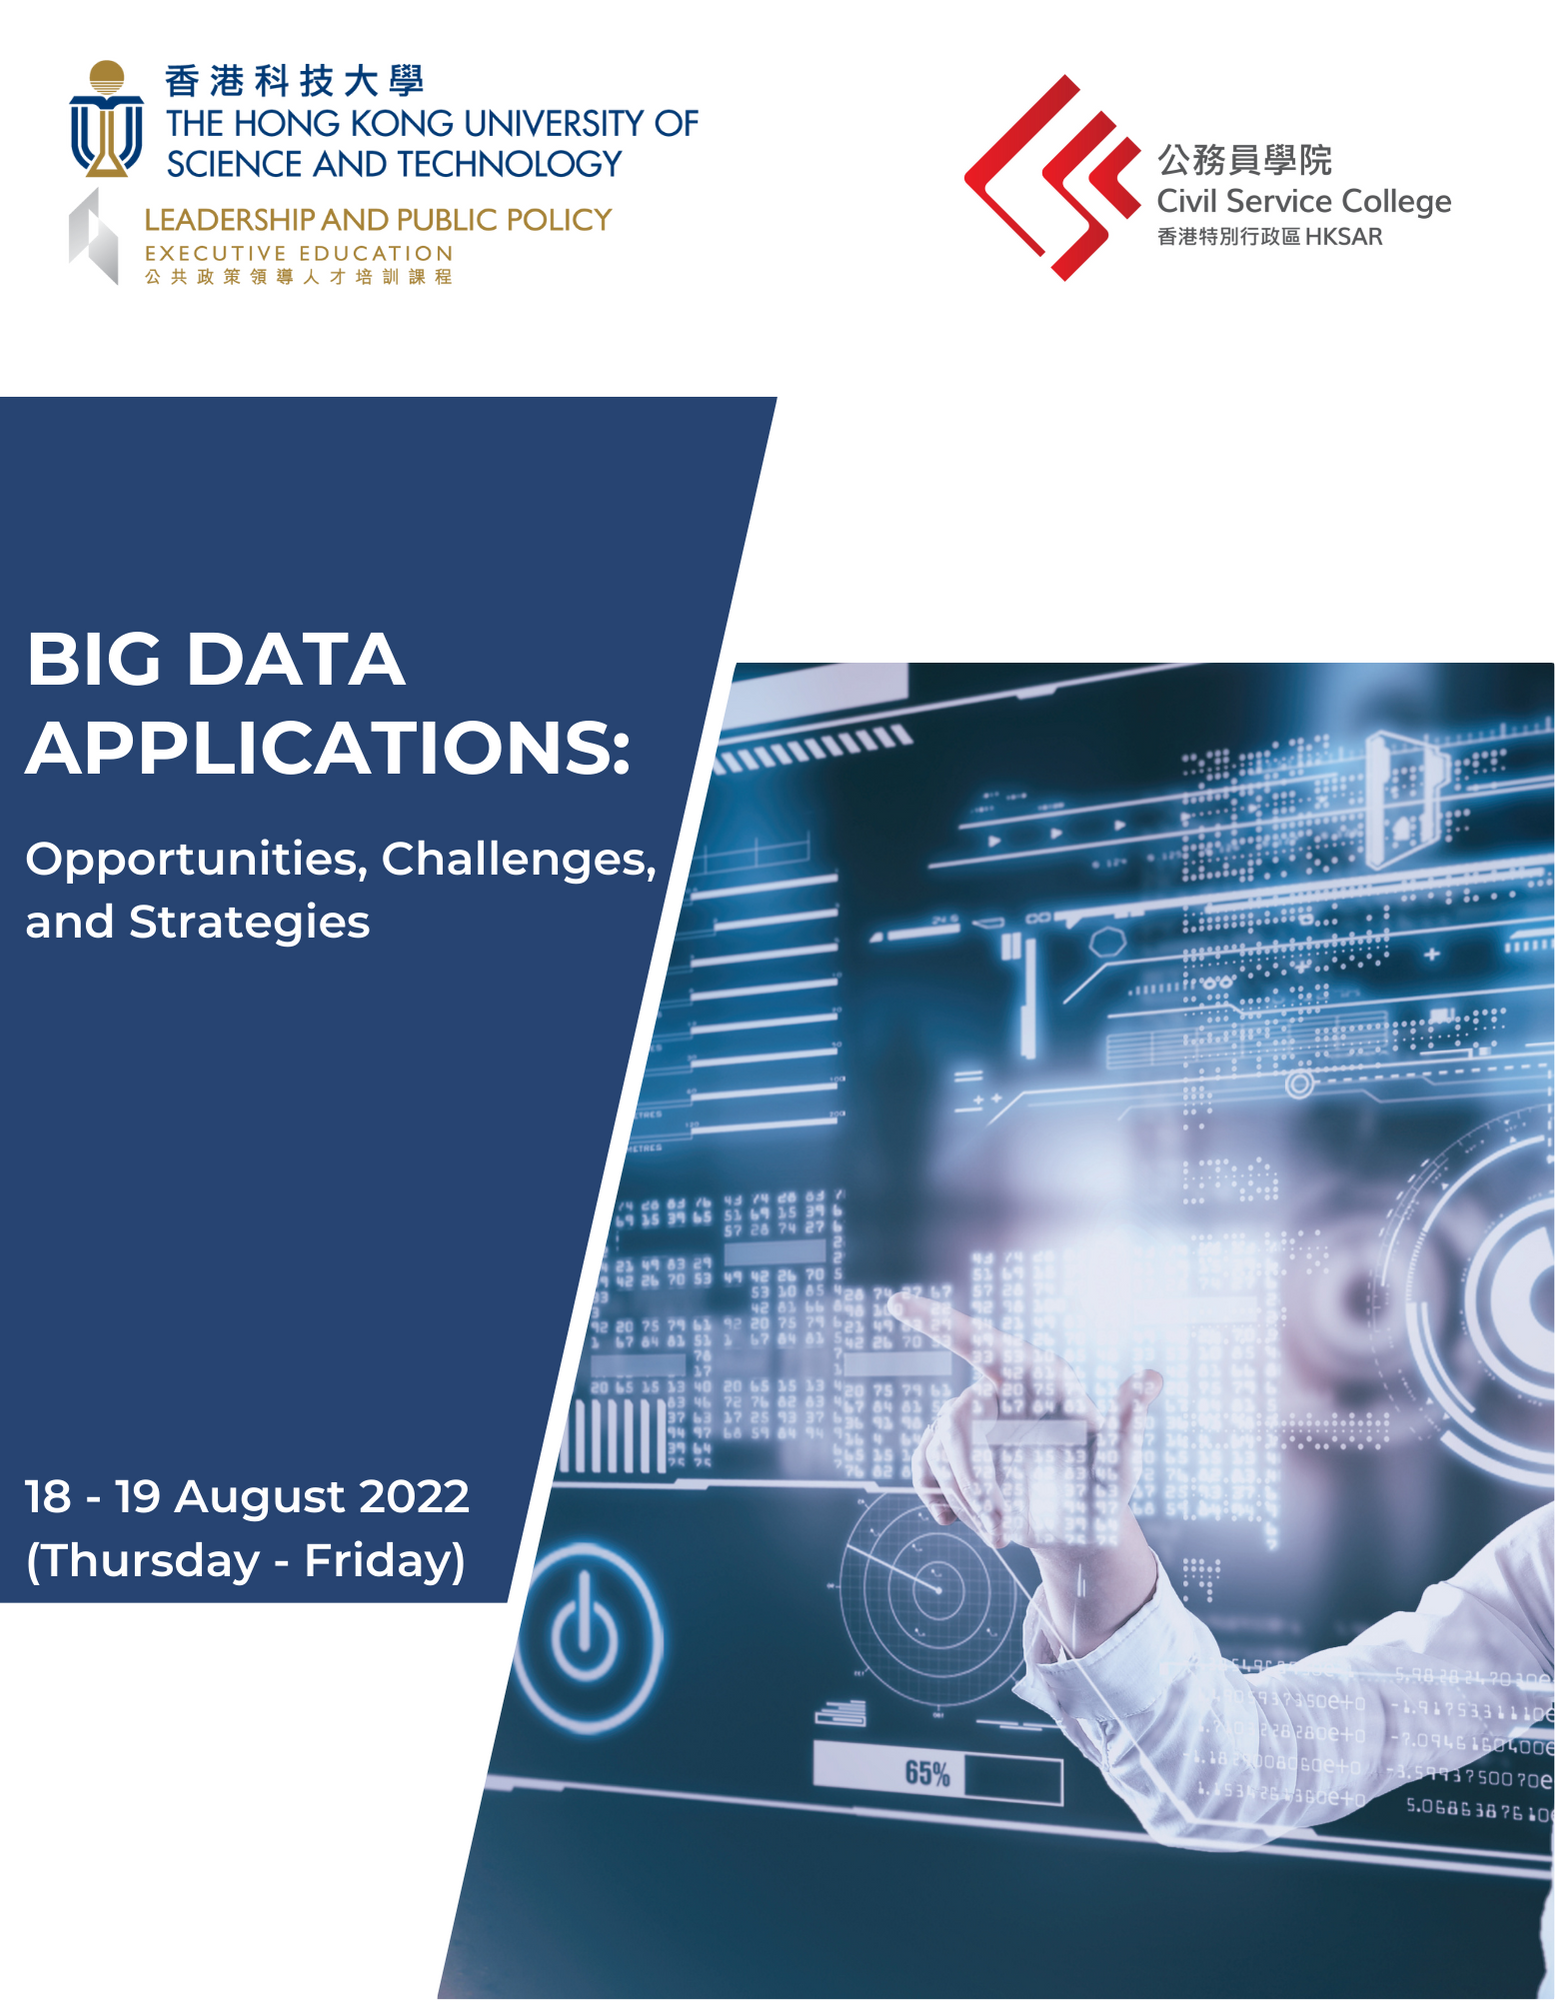 Big Data Applications: Opportunities, Challenges, and Strategies